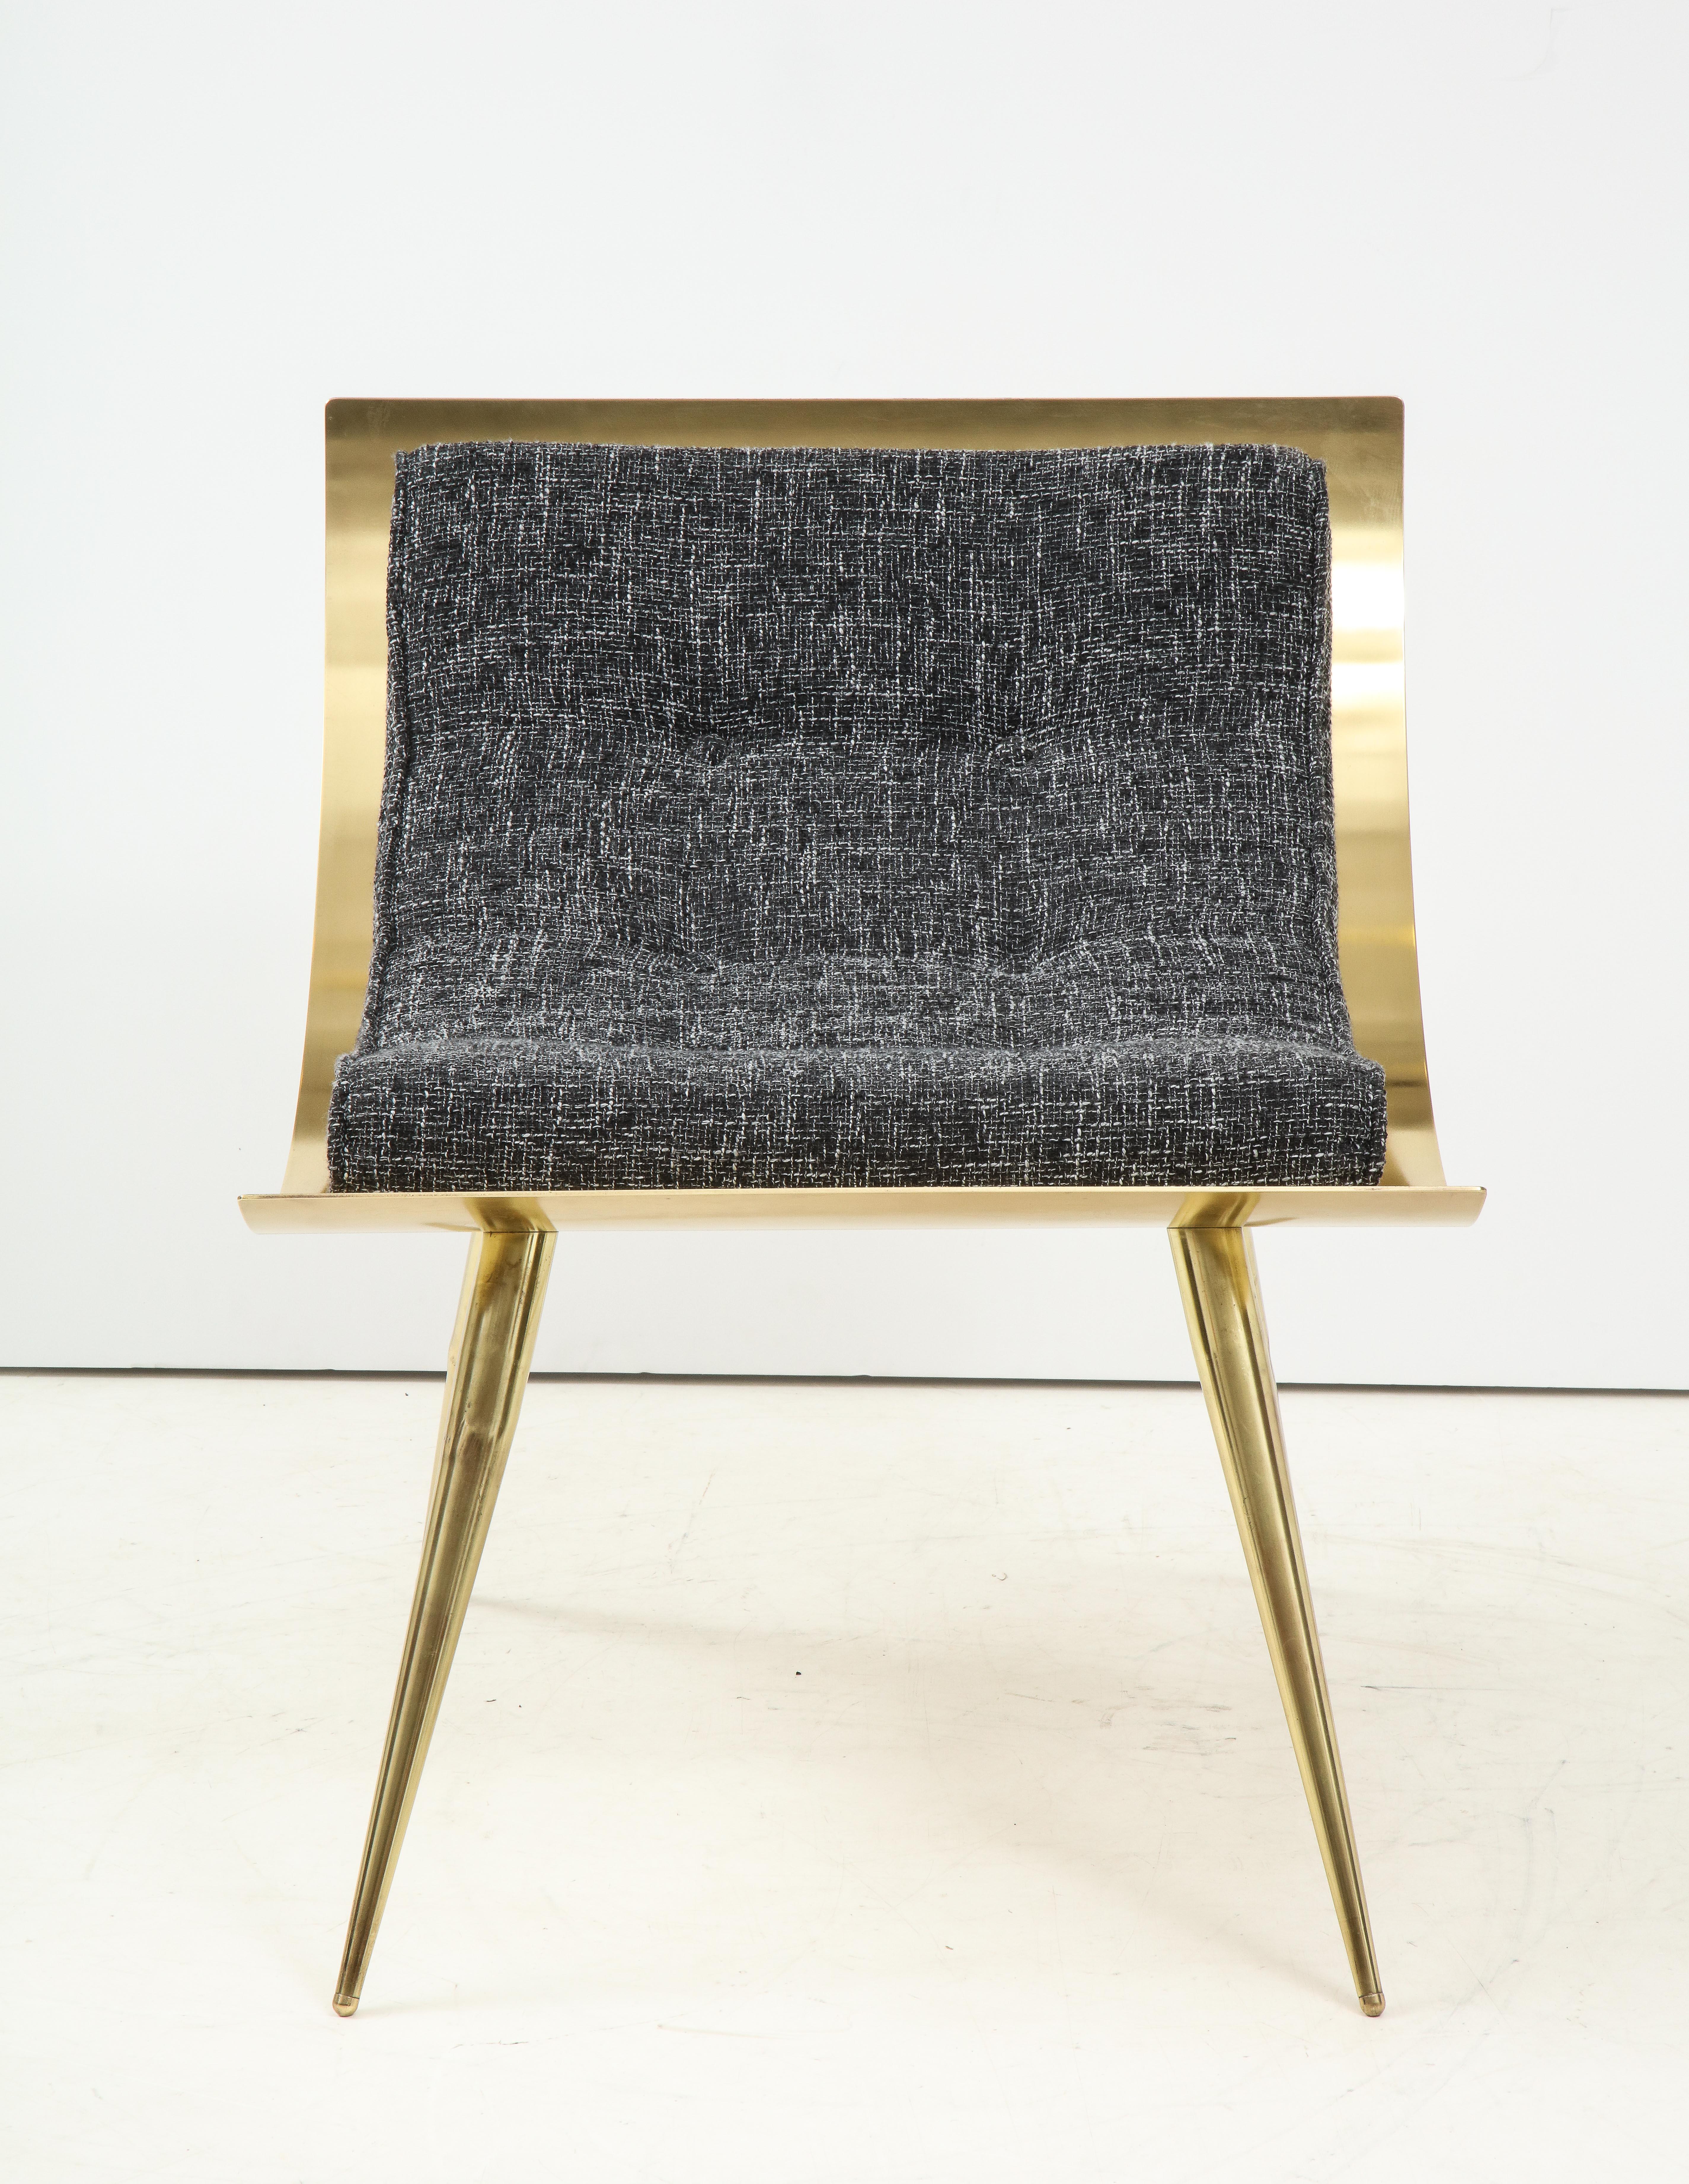 One of a kind sculptural solid brass accent chair with Italian grey woven wool tweed upholstery. Curved Brass back is polished and lacquered with a warm patina. Straight brass legs with brass cross bars for support. Upholstered in an imported, grey